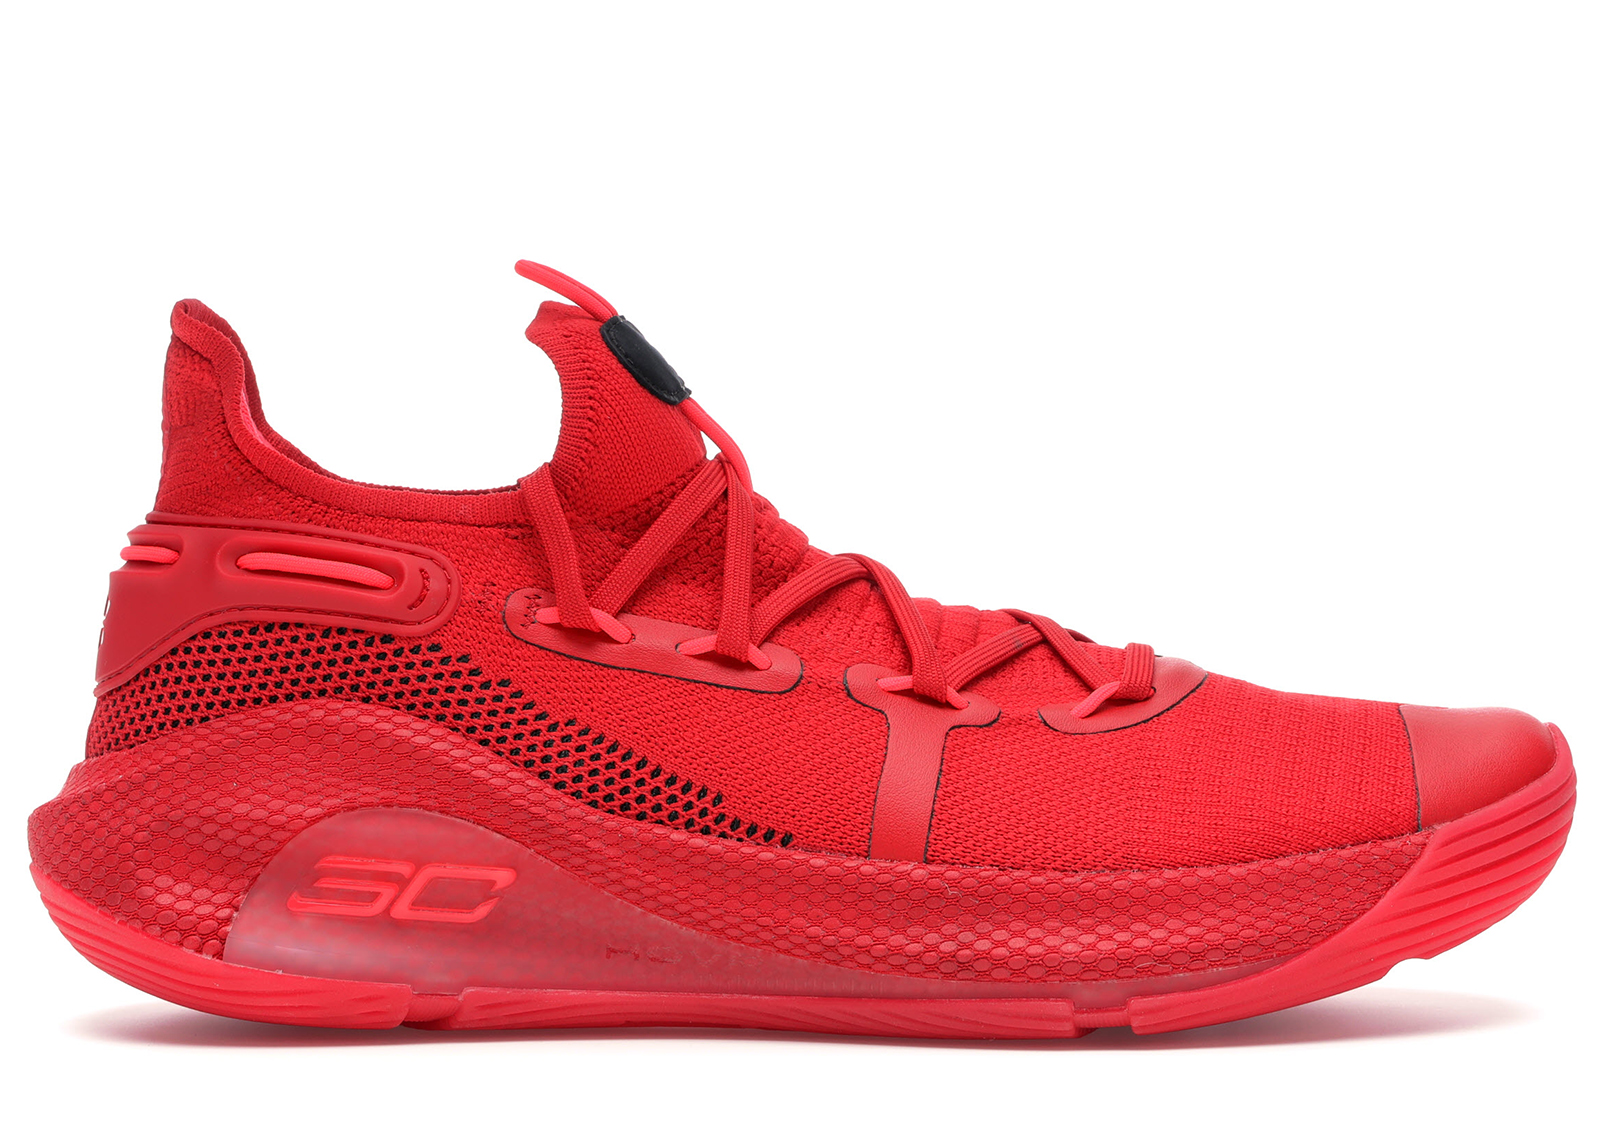 Under Armour Curry 6 Red - 3020612-603